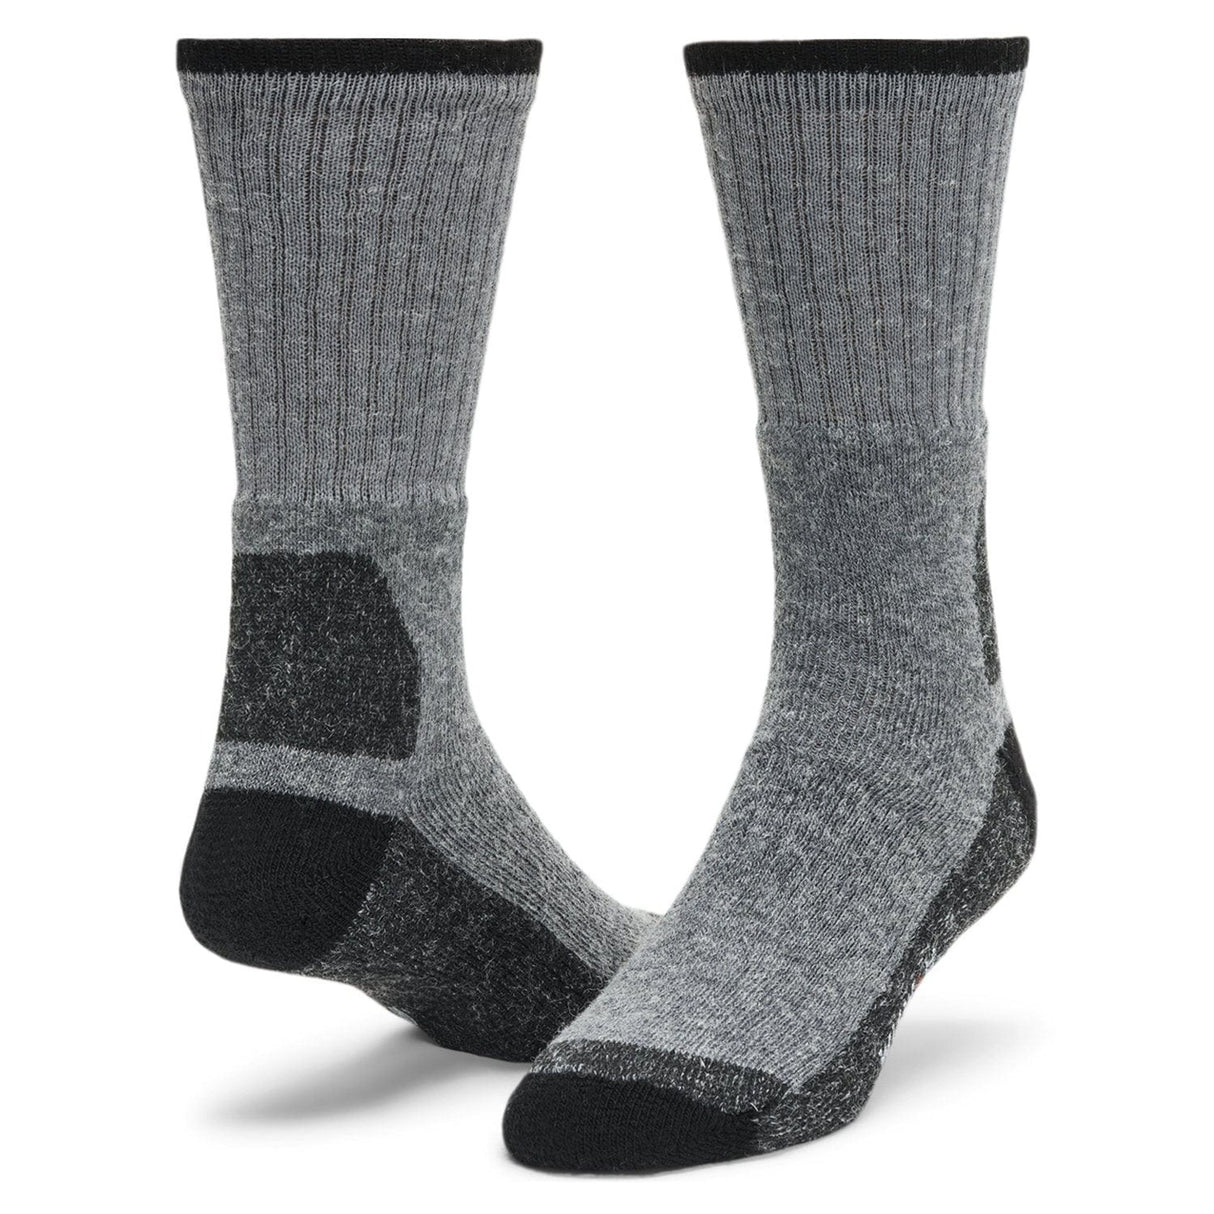 Wigwam At Work Double Duty Crew with Wool 2-Pack Socks  -  Medium / Gray